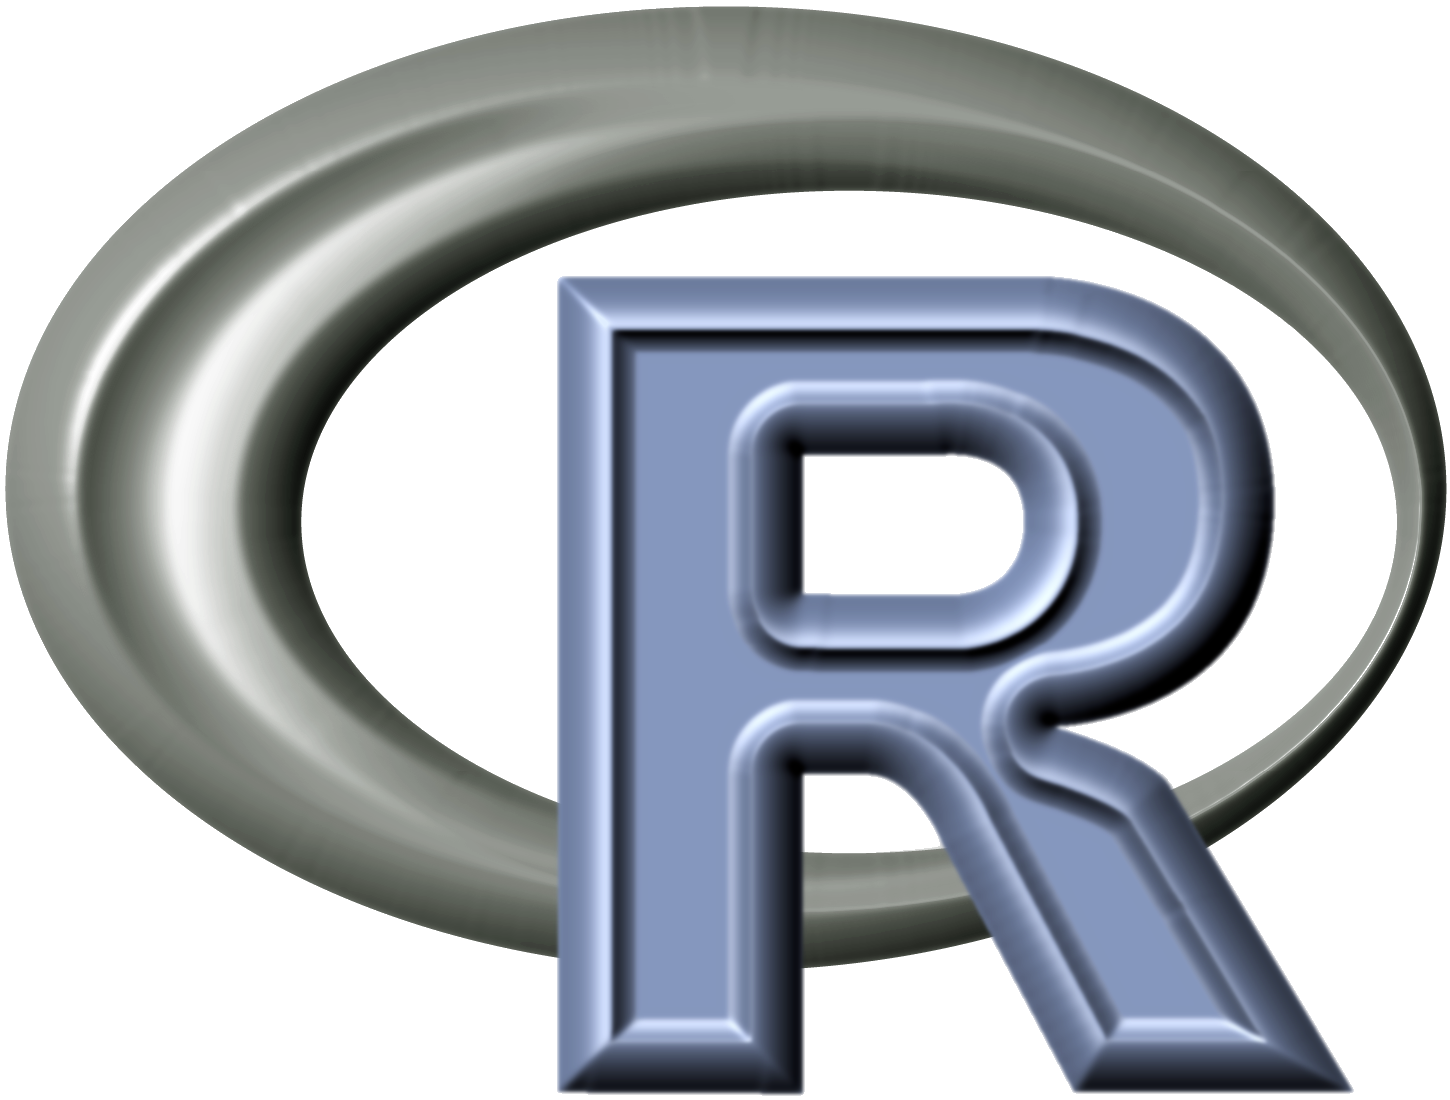 r and r studio software layour